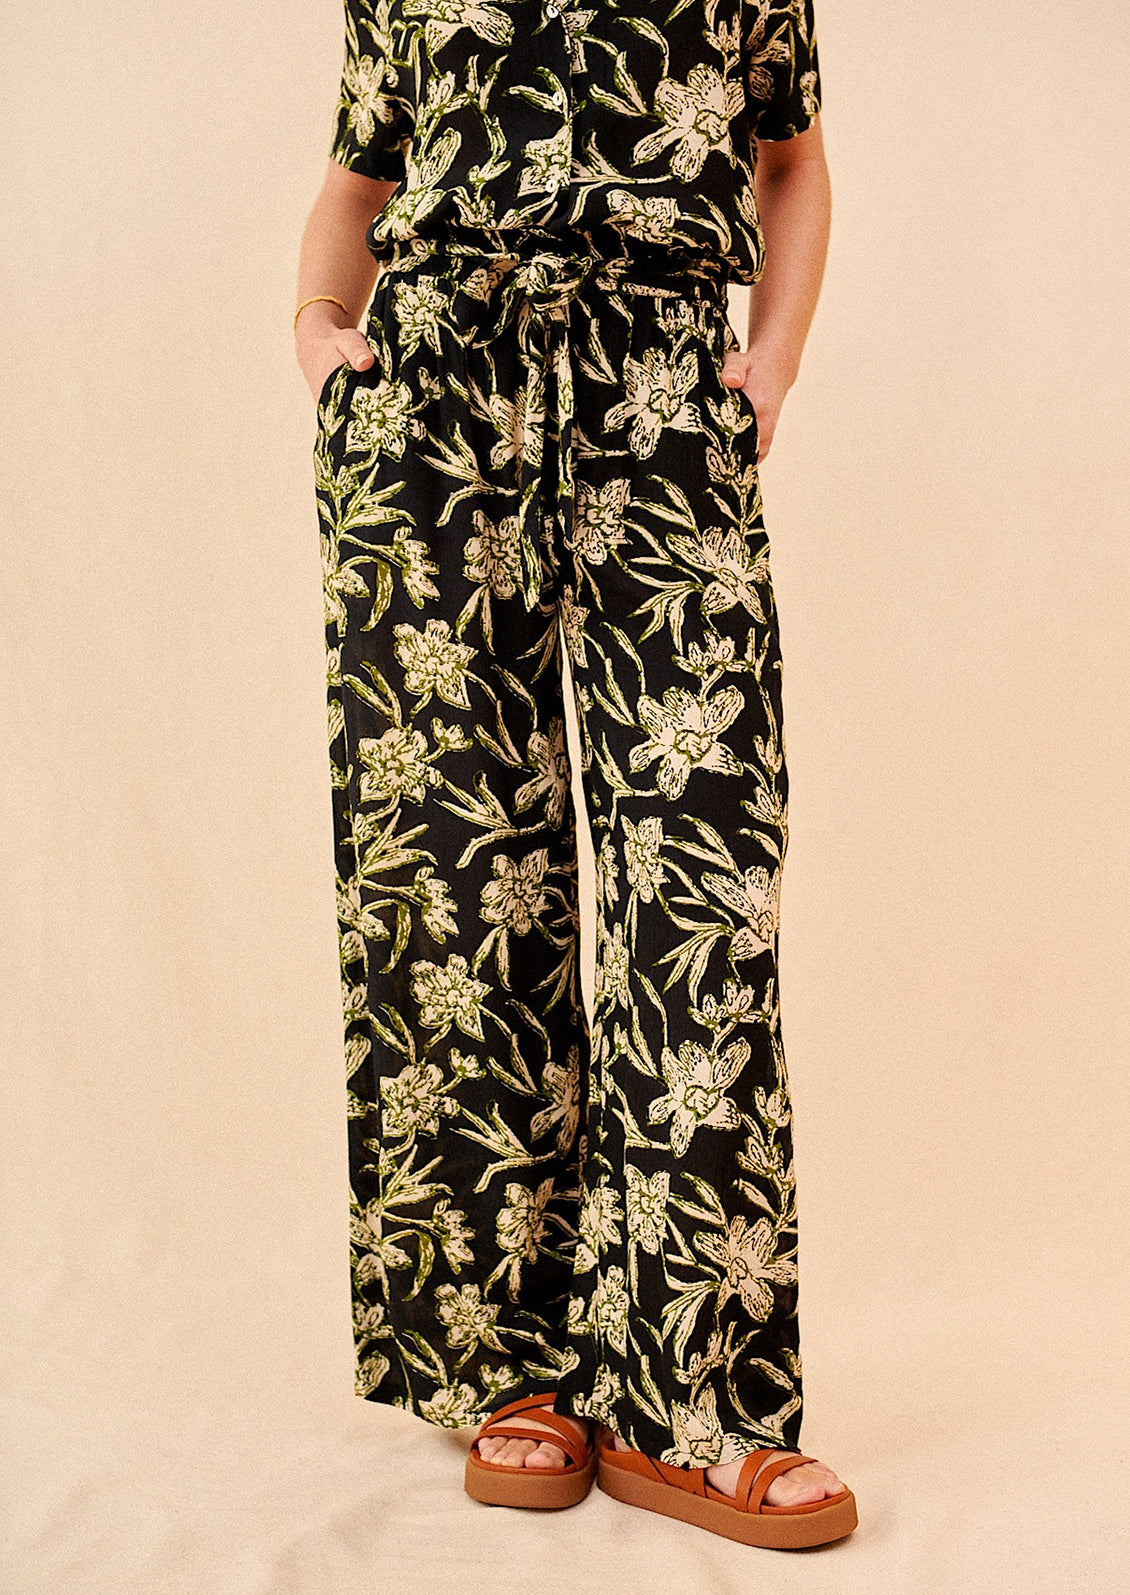 A pair of flowy pants in black with all over cream and green floral print.